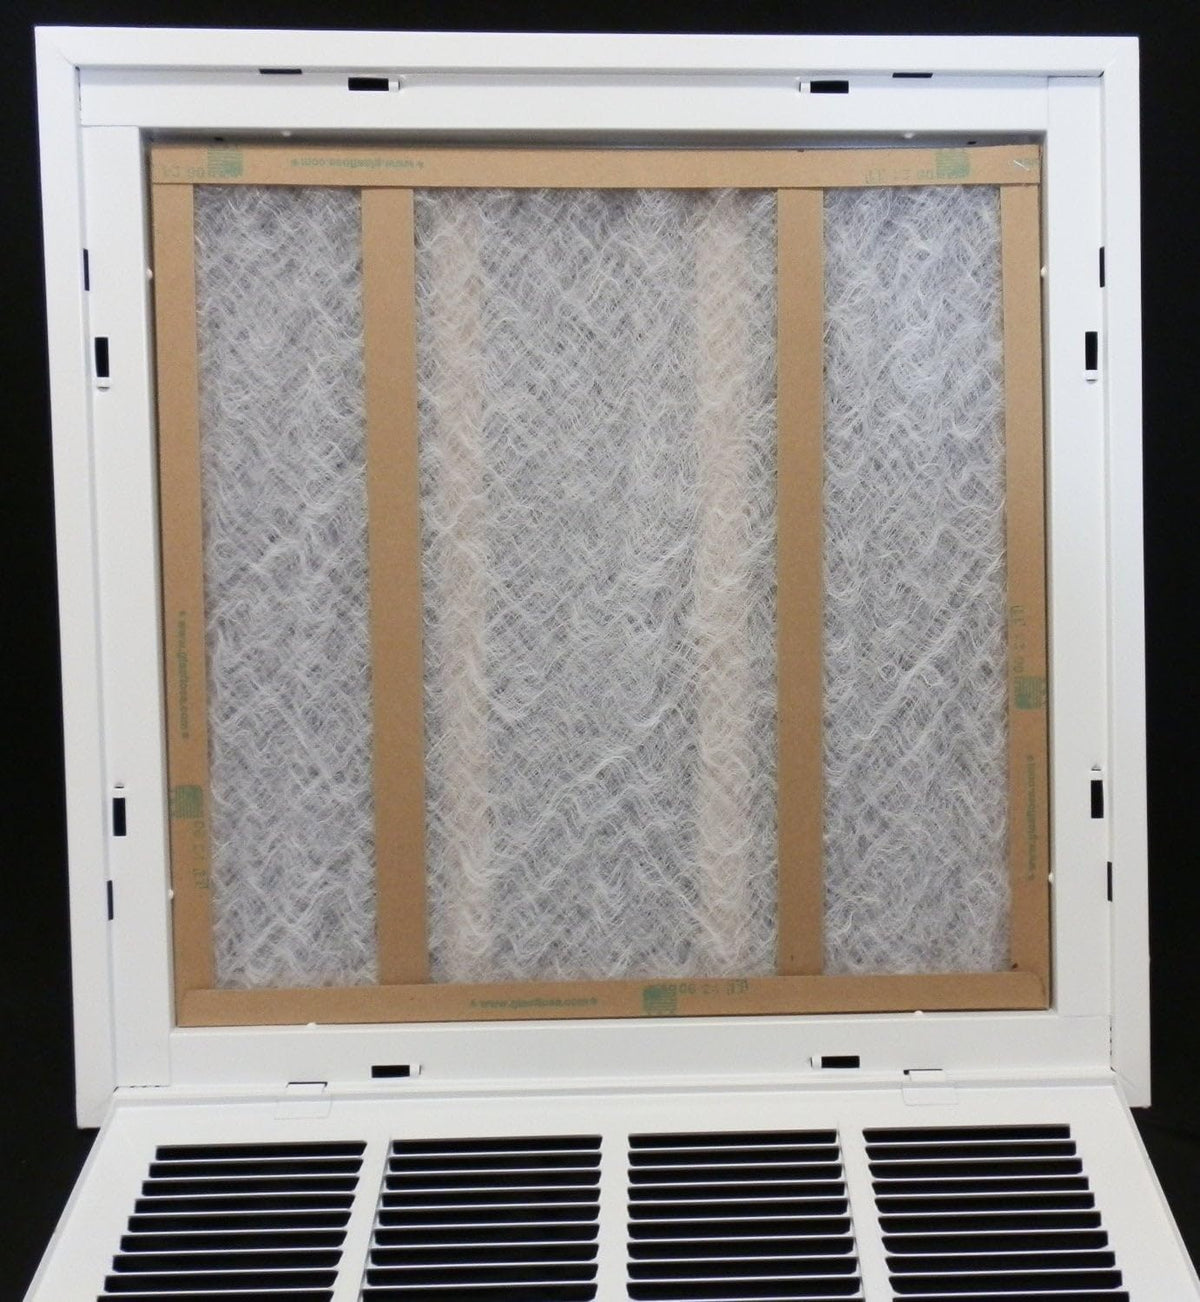 30&quot; X 20&quot; Steel Return Air Filter Grille for 1&quot; Filter - Removable Frame - * Filter Included * [Outer Dimensions: 32 5/8&quot; X 22 5/8&quot;]